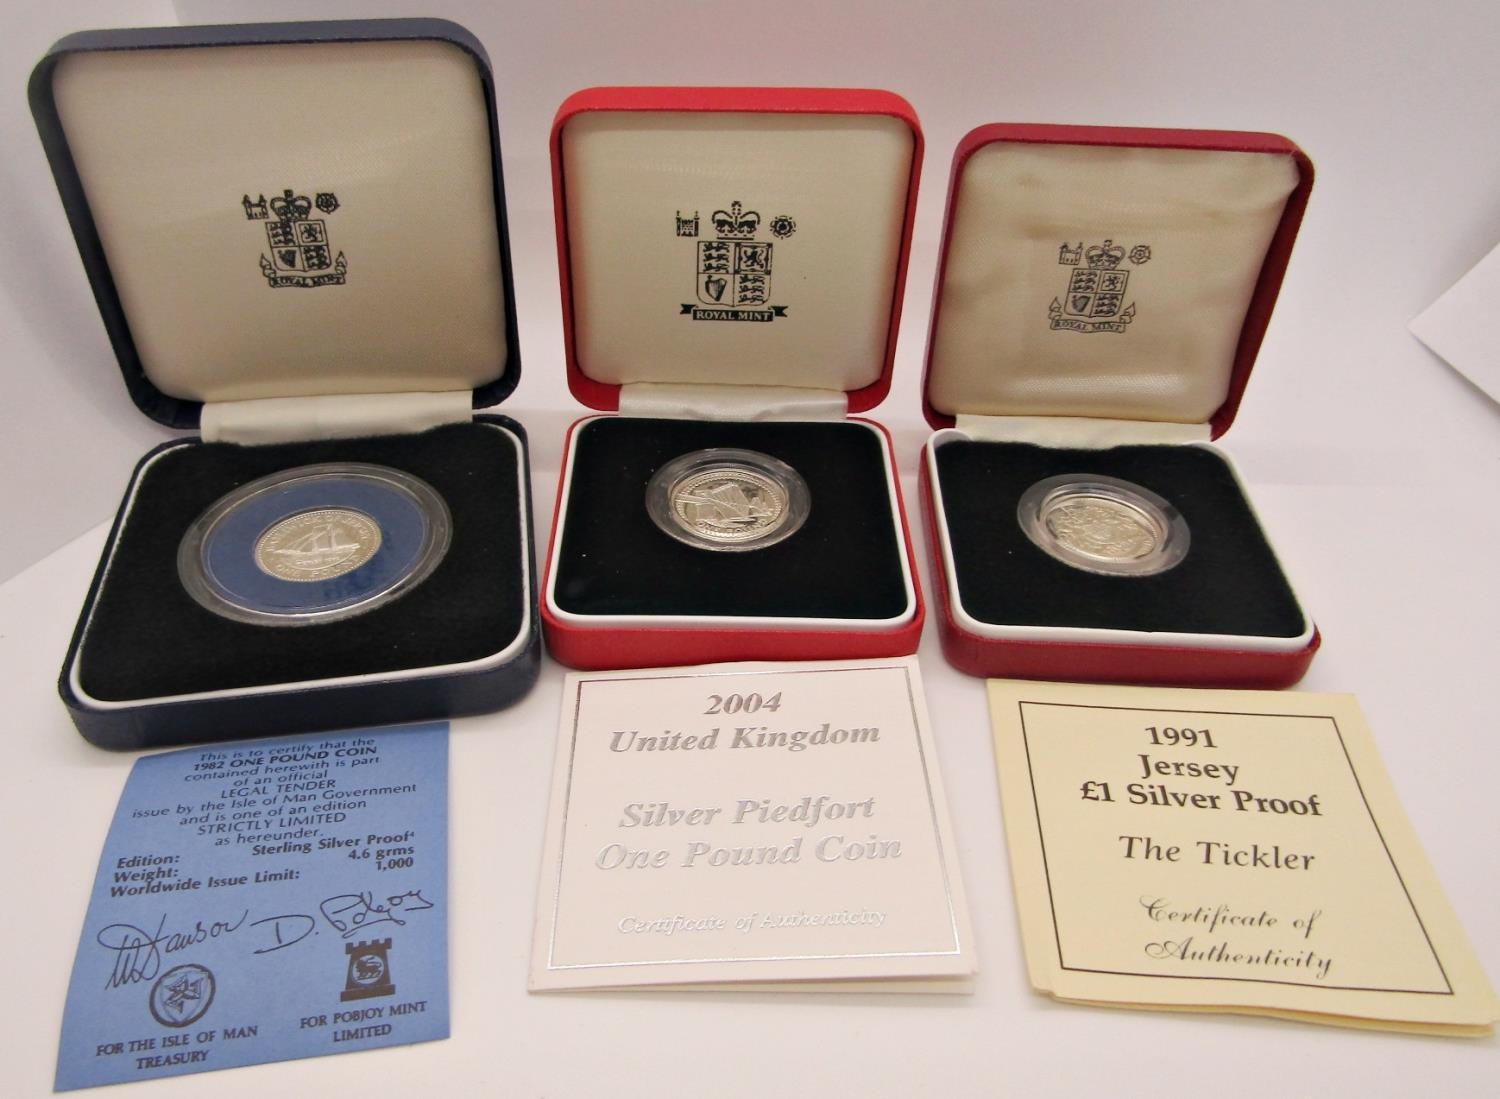 Two Piedfort Silver Proof £1 coins, 2000 and 2004, Pobjoy Proof Isle of Man £1 1980 x 2 and 1991 £